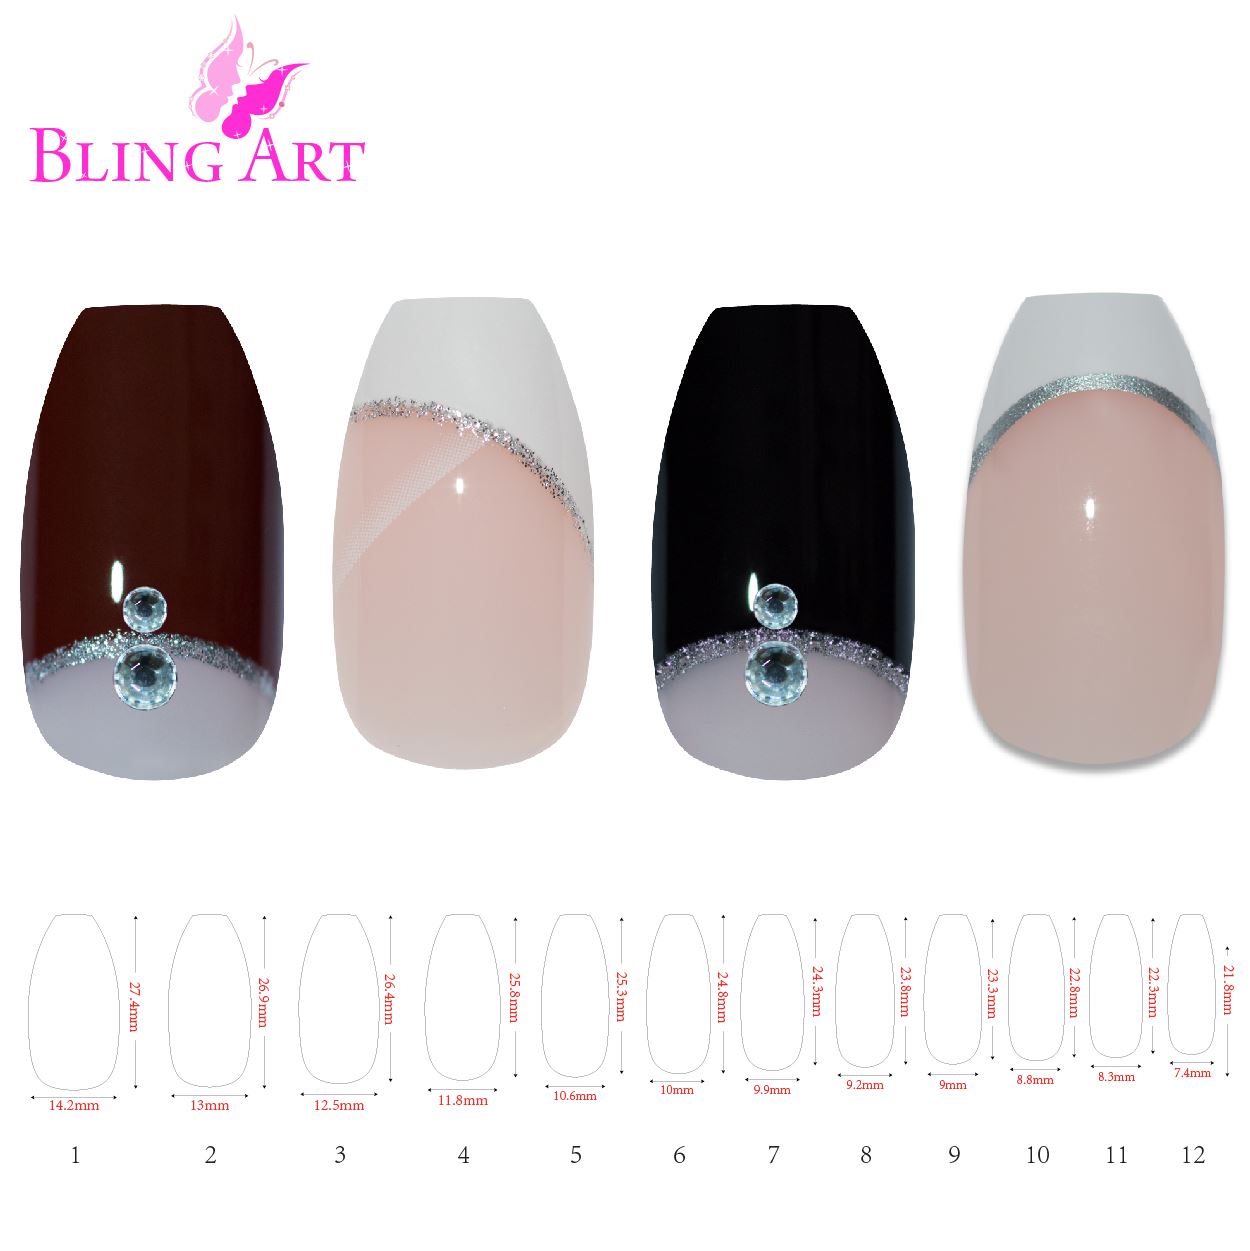 False Nails by Bling Art 360 Coffin Ballerina Long Transparent Acrylic Fake Nail Tips without glue